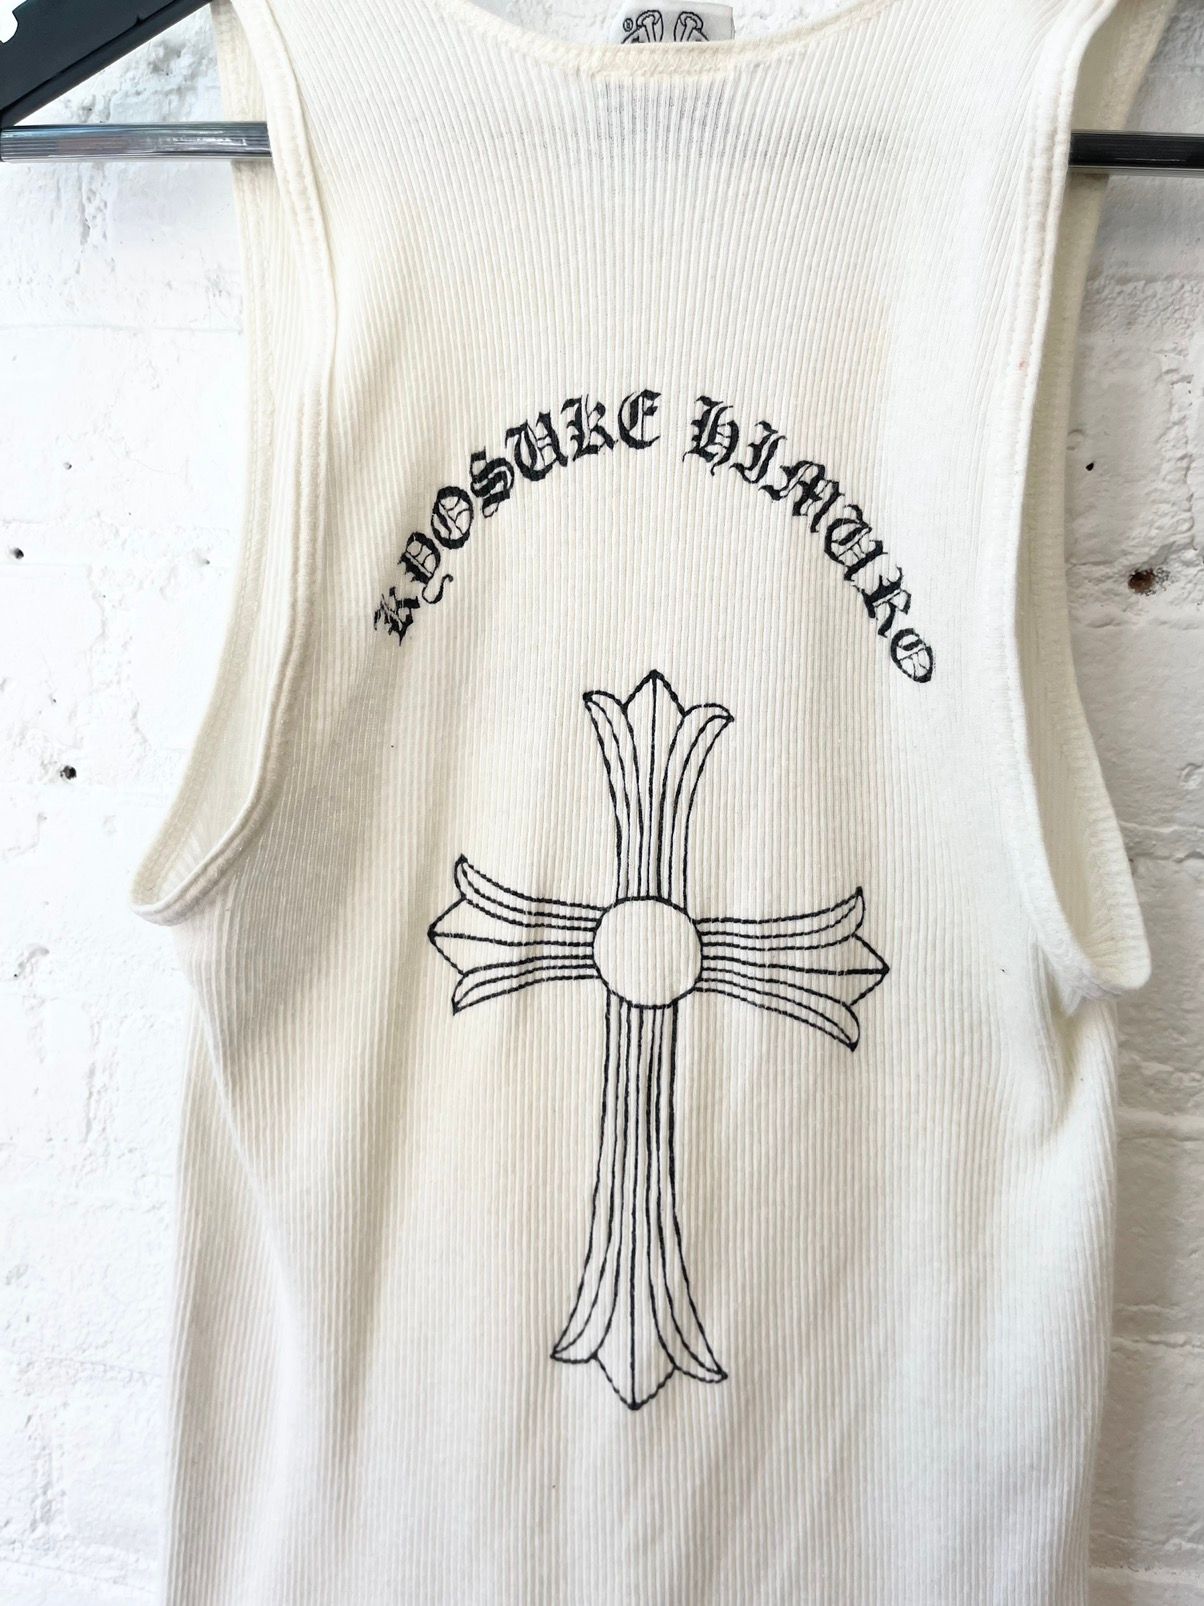 Chrome Hearts ONE NIGHT STAND Vintage Cross Tank Top Shirt M